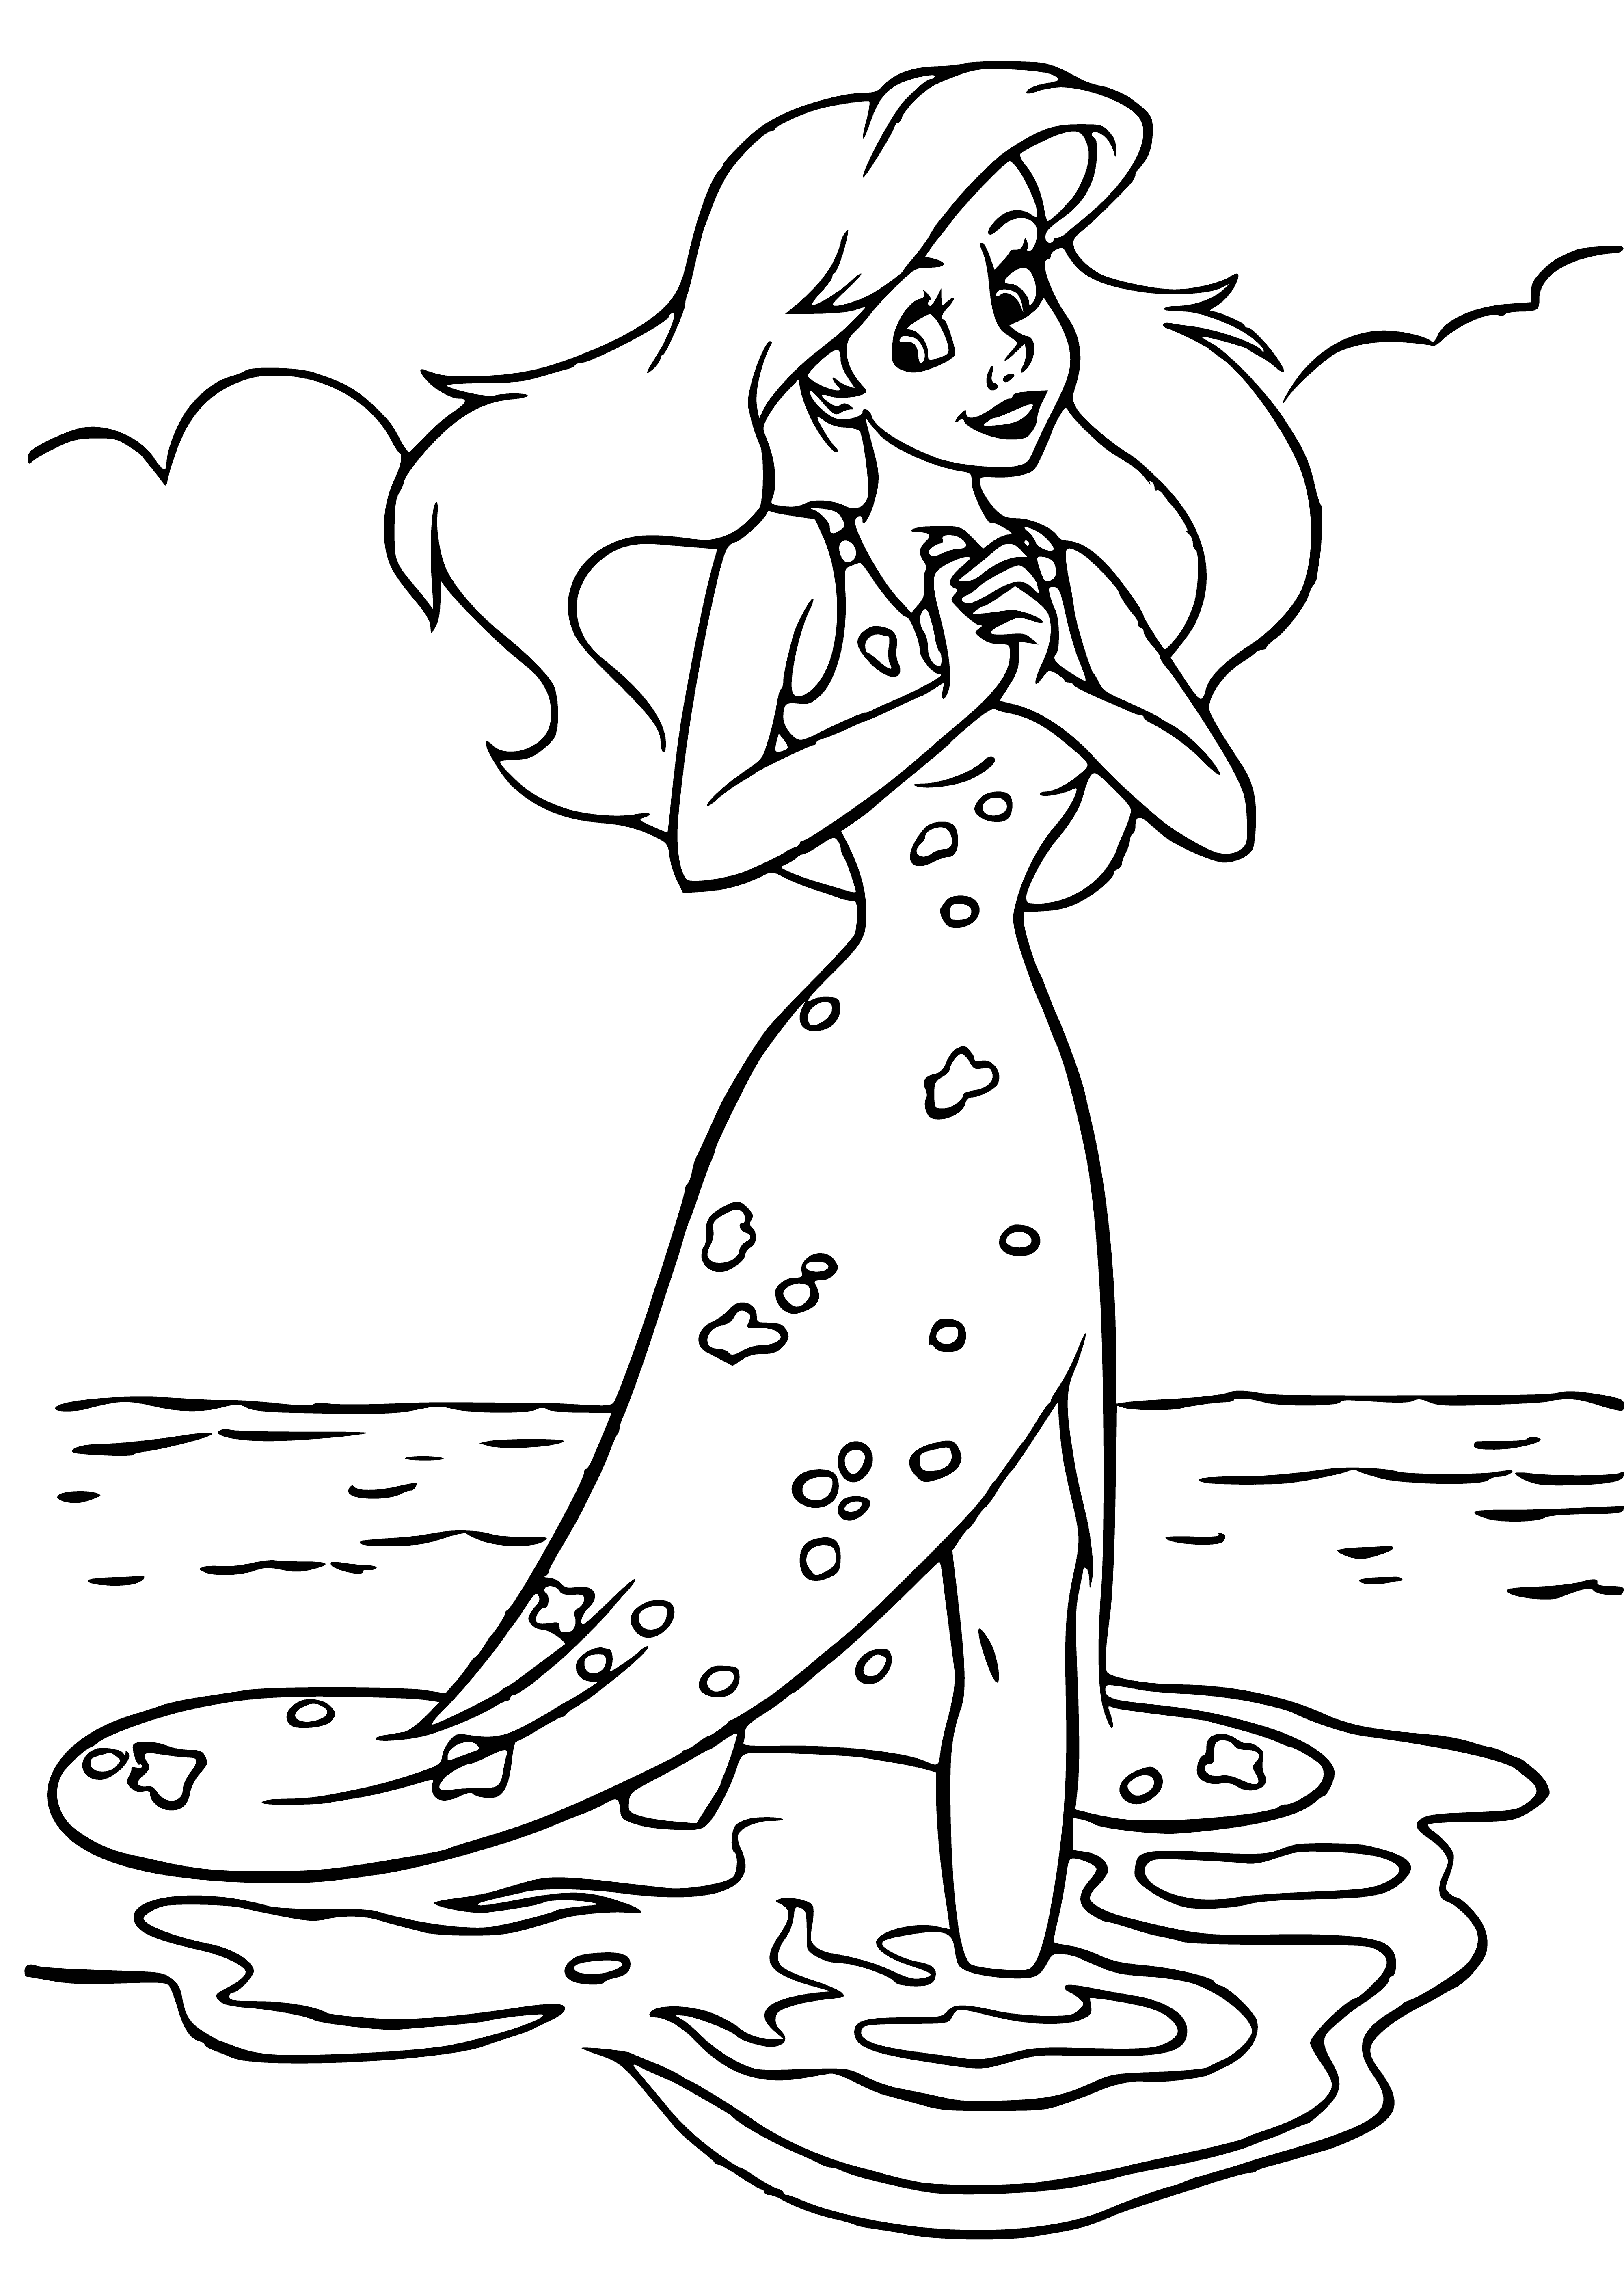 coloring page: A woman smiles from atop a rock in the ocean, wearing a green seashell and pink skirt. She has long red hair and bare legs with a fish tail.